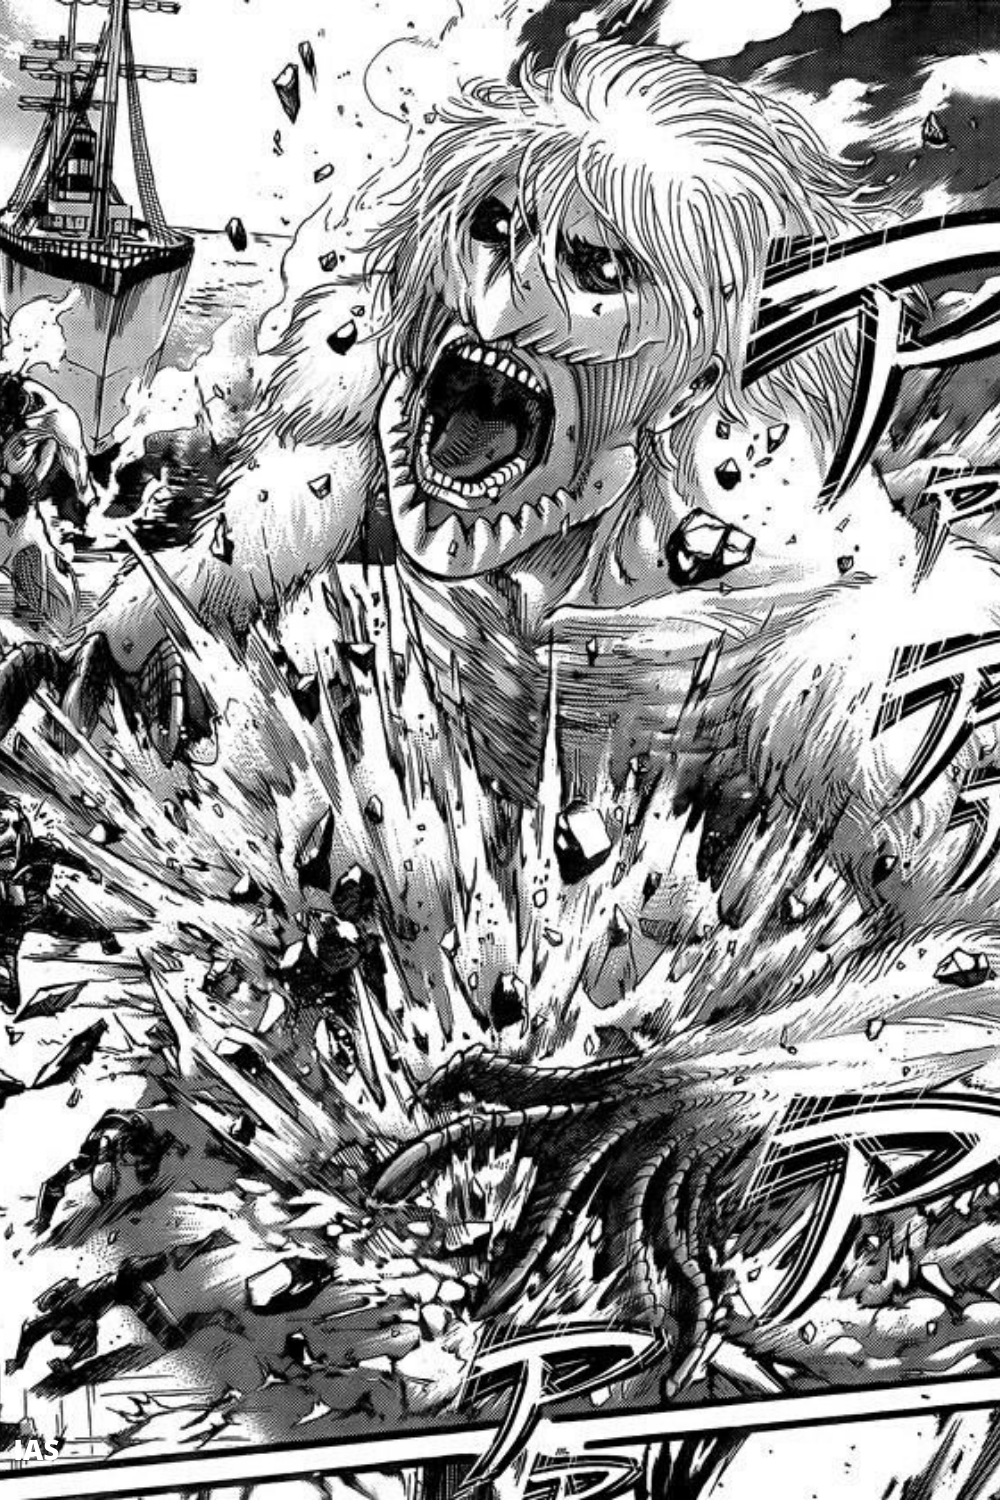 Falco Transforms into the Jaw Titan for the First Time. Attack on titan art, Attack on titan series, Art